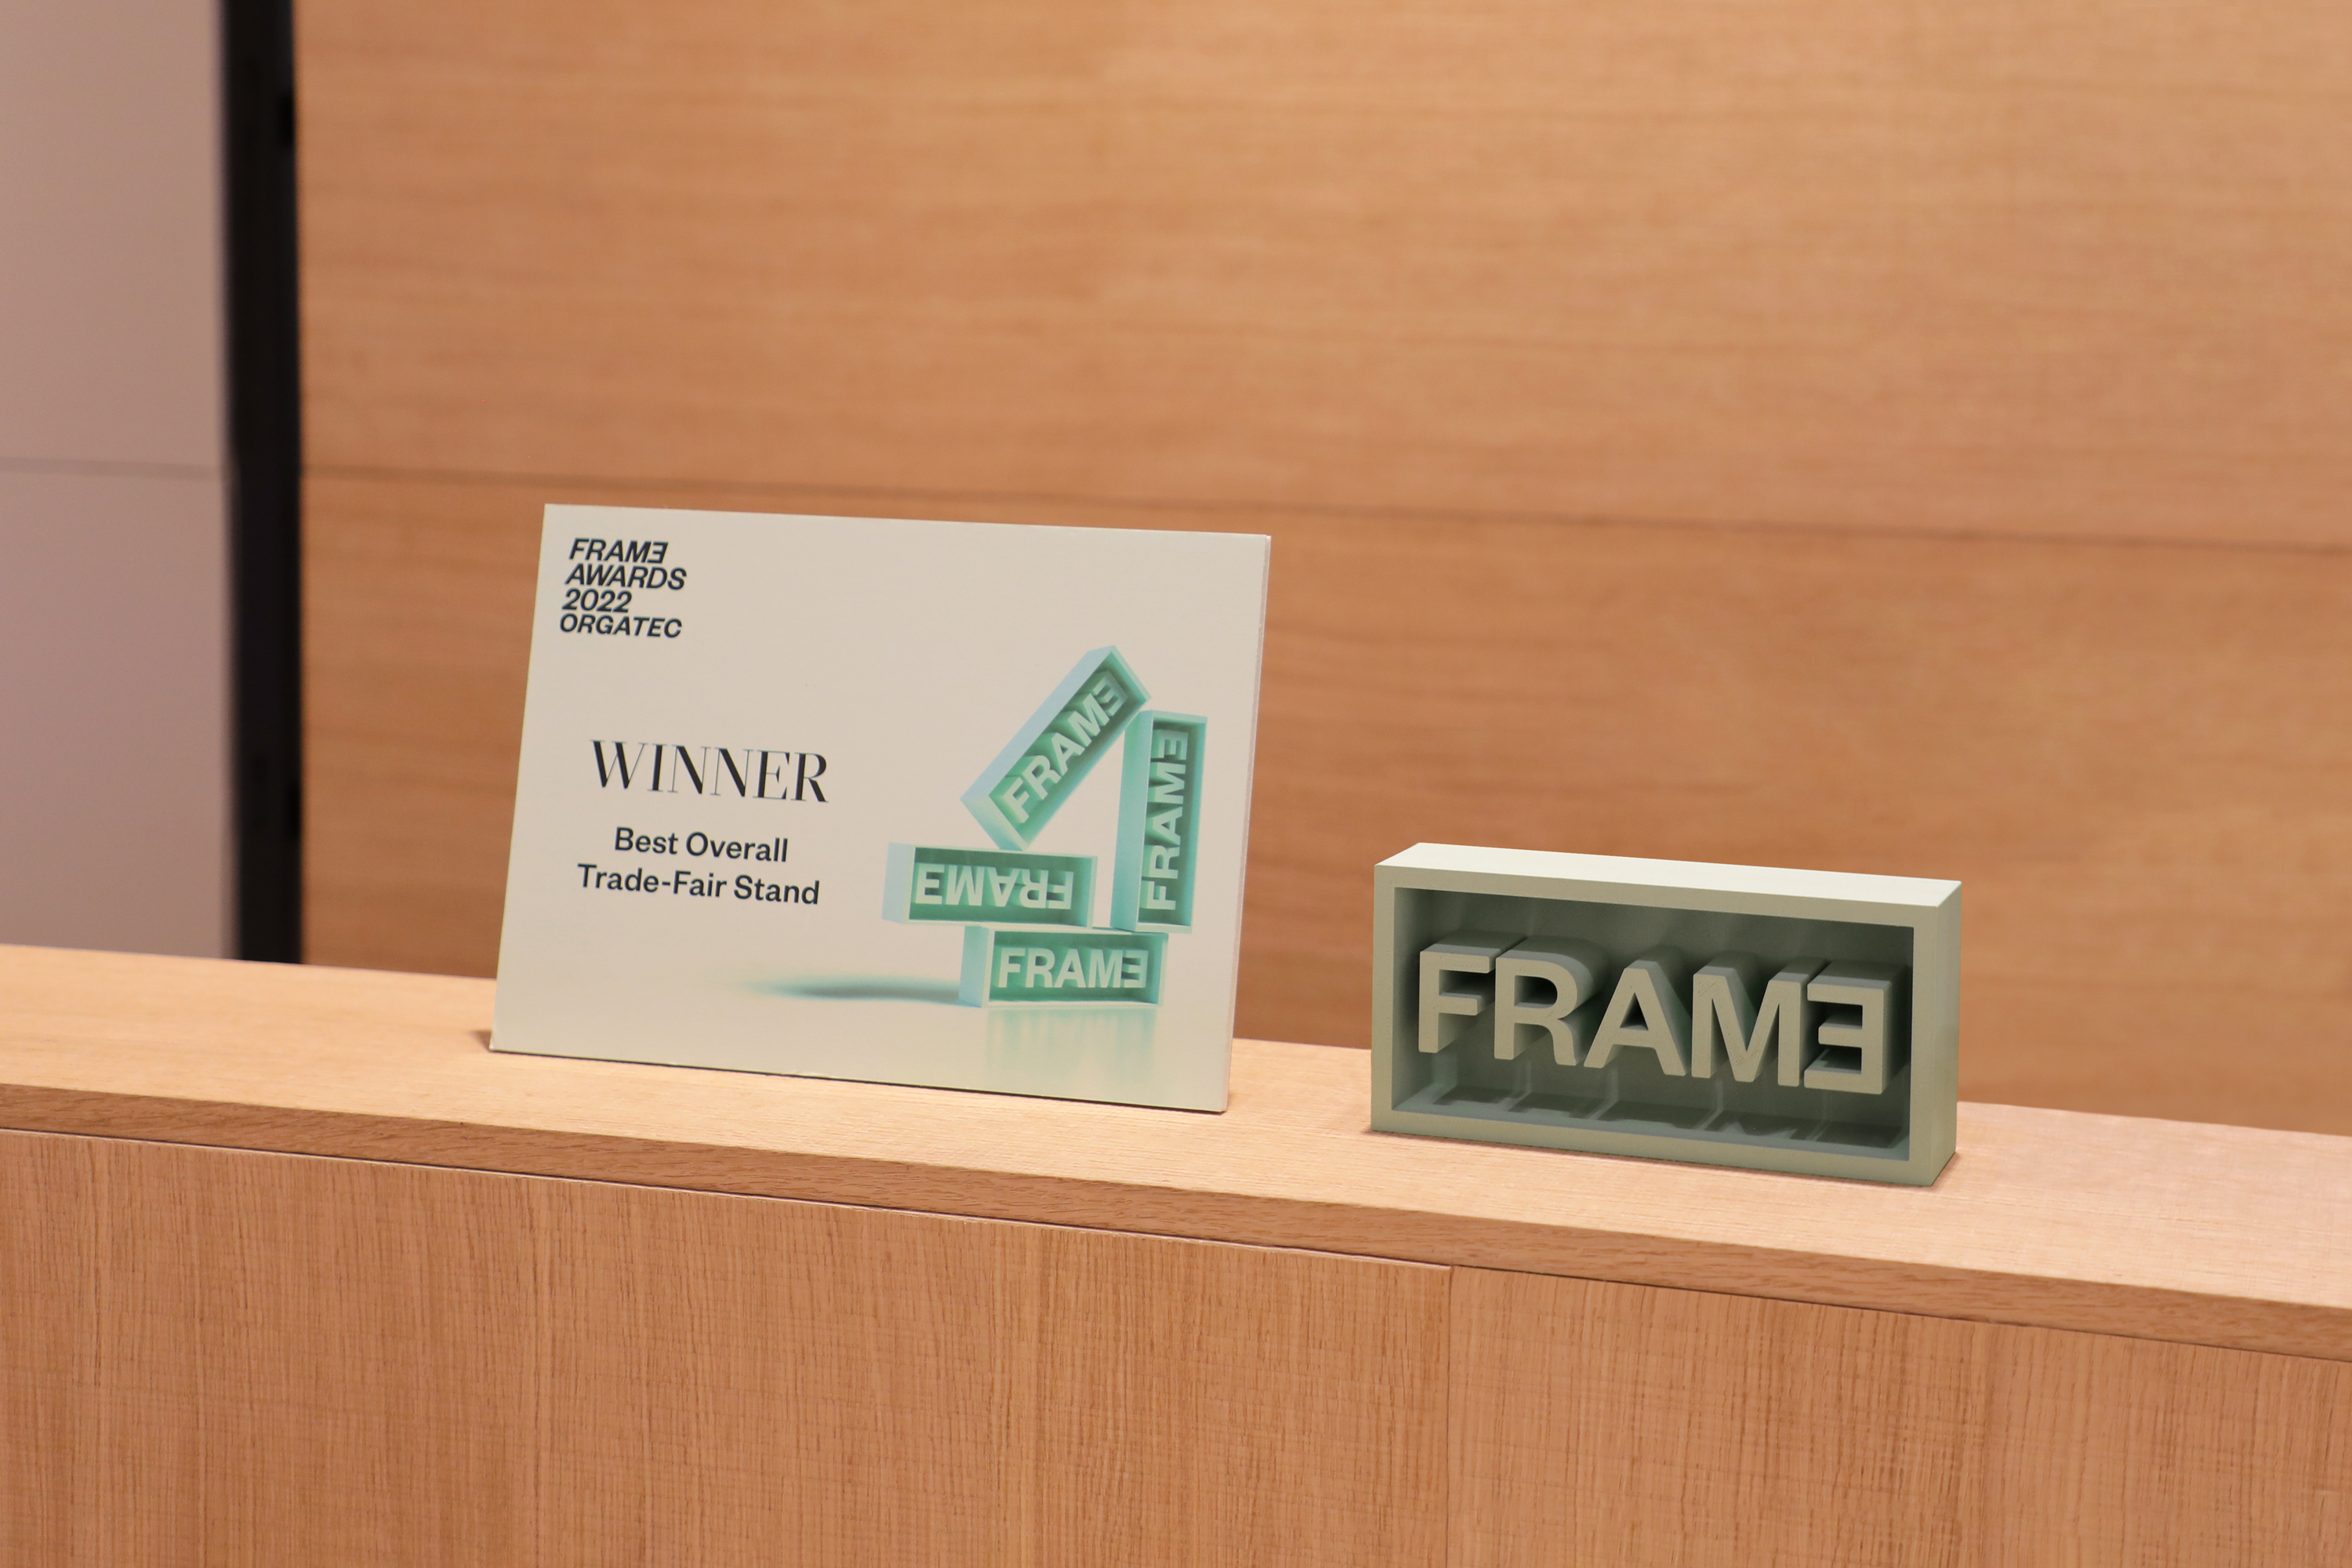 We won Frame Award for Best Overall Trade-Fair Stand at Orgatec